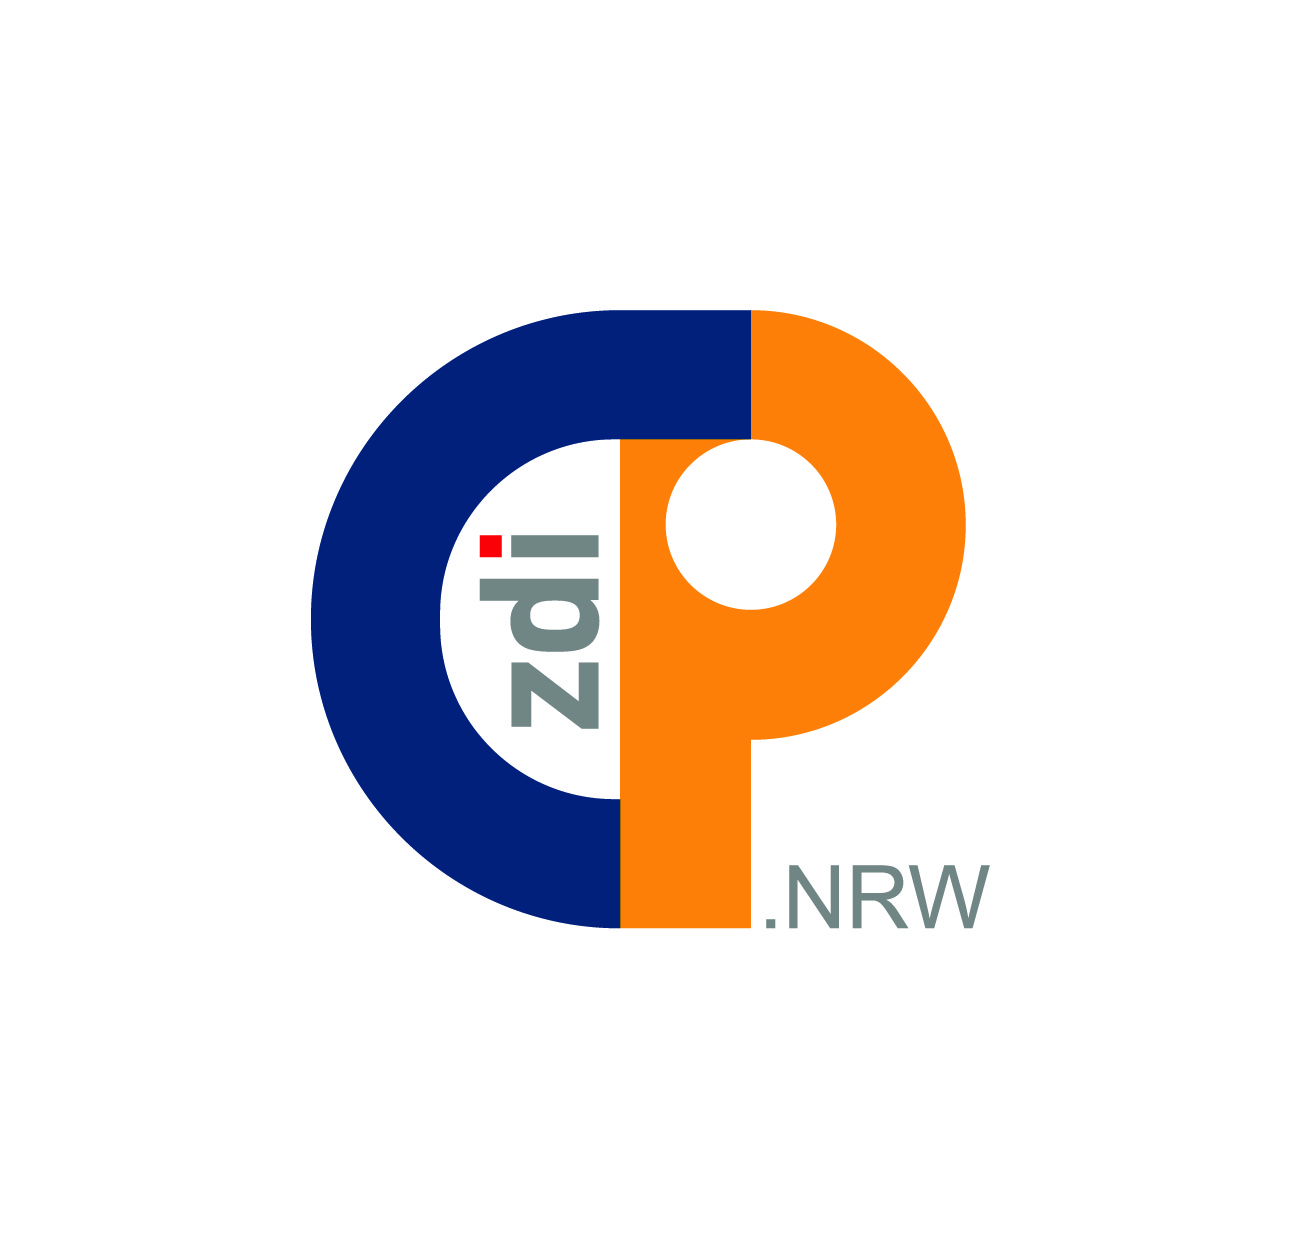 The graphic shows the new logo of the zdi community platform. It features a dark blue C that fades into an orange P. In the white space between C and P, zdi is gray, the dot on the i is red. NRW is written in small gray letters at the bottom next to the P.